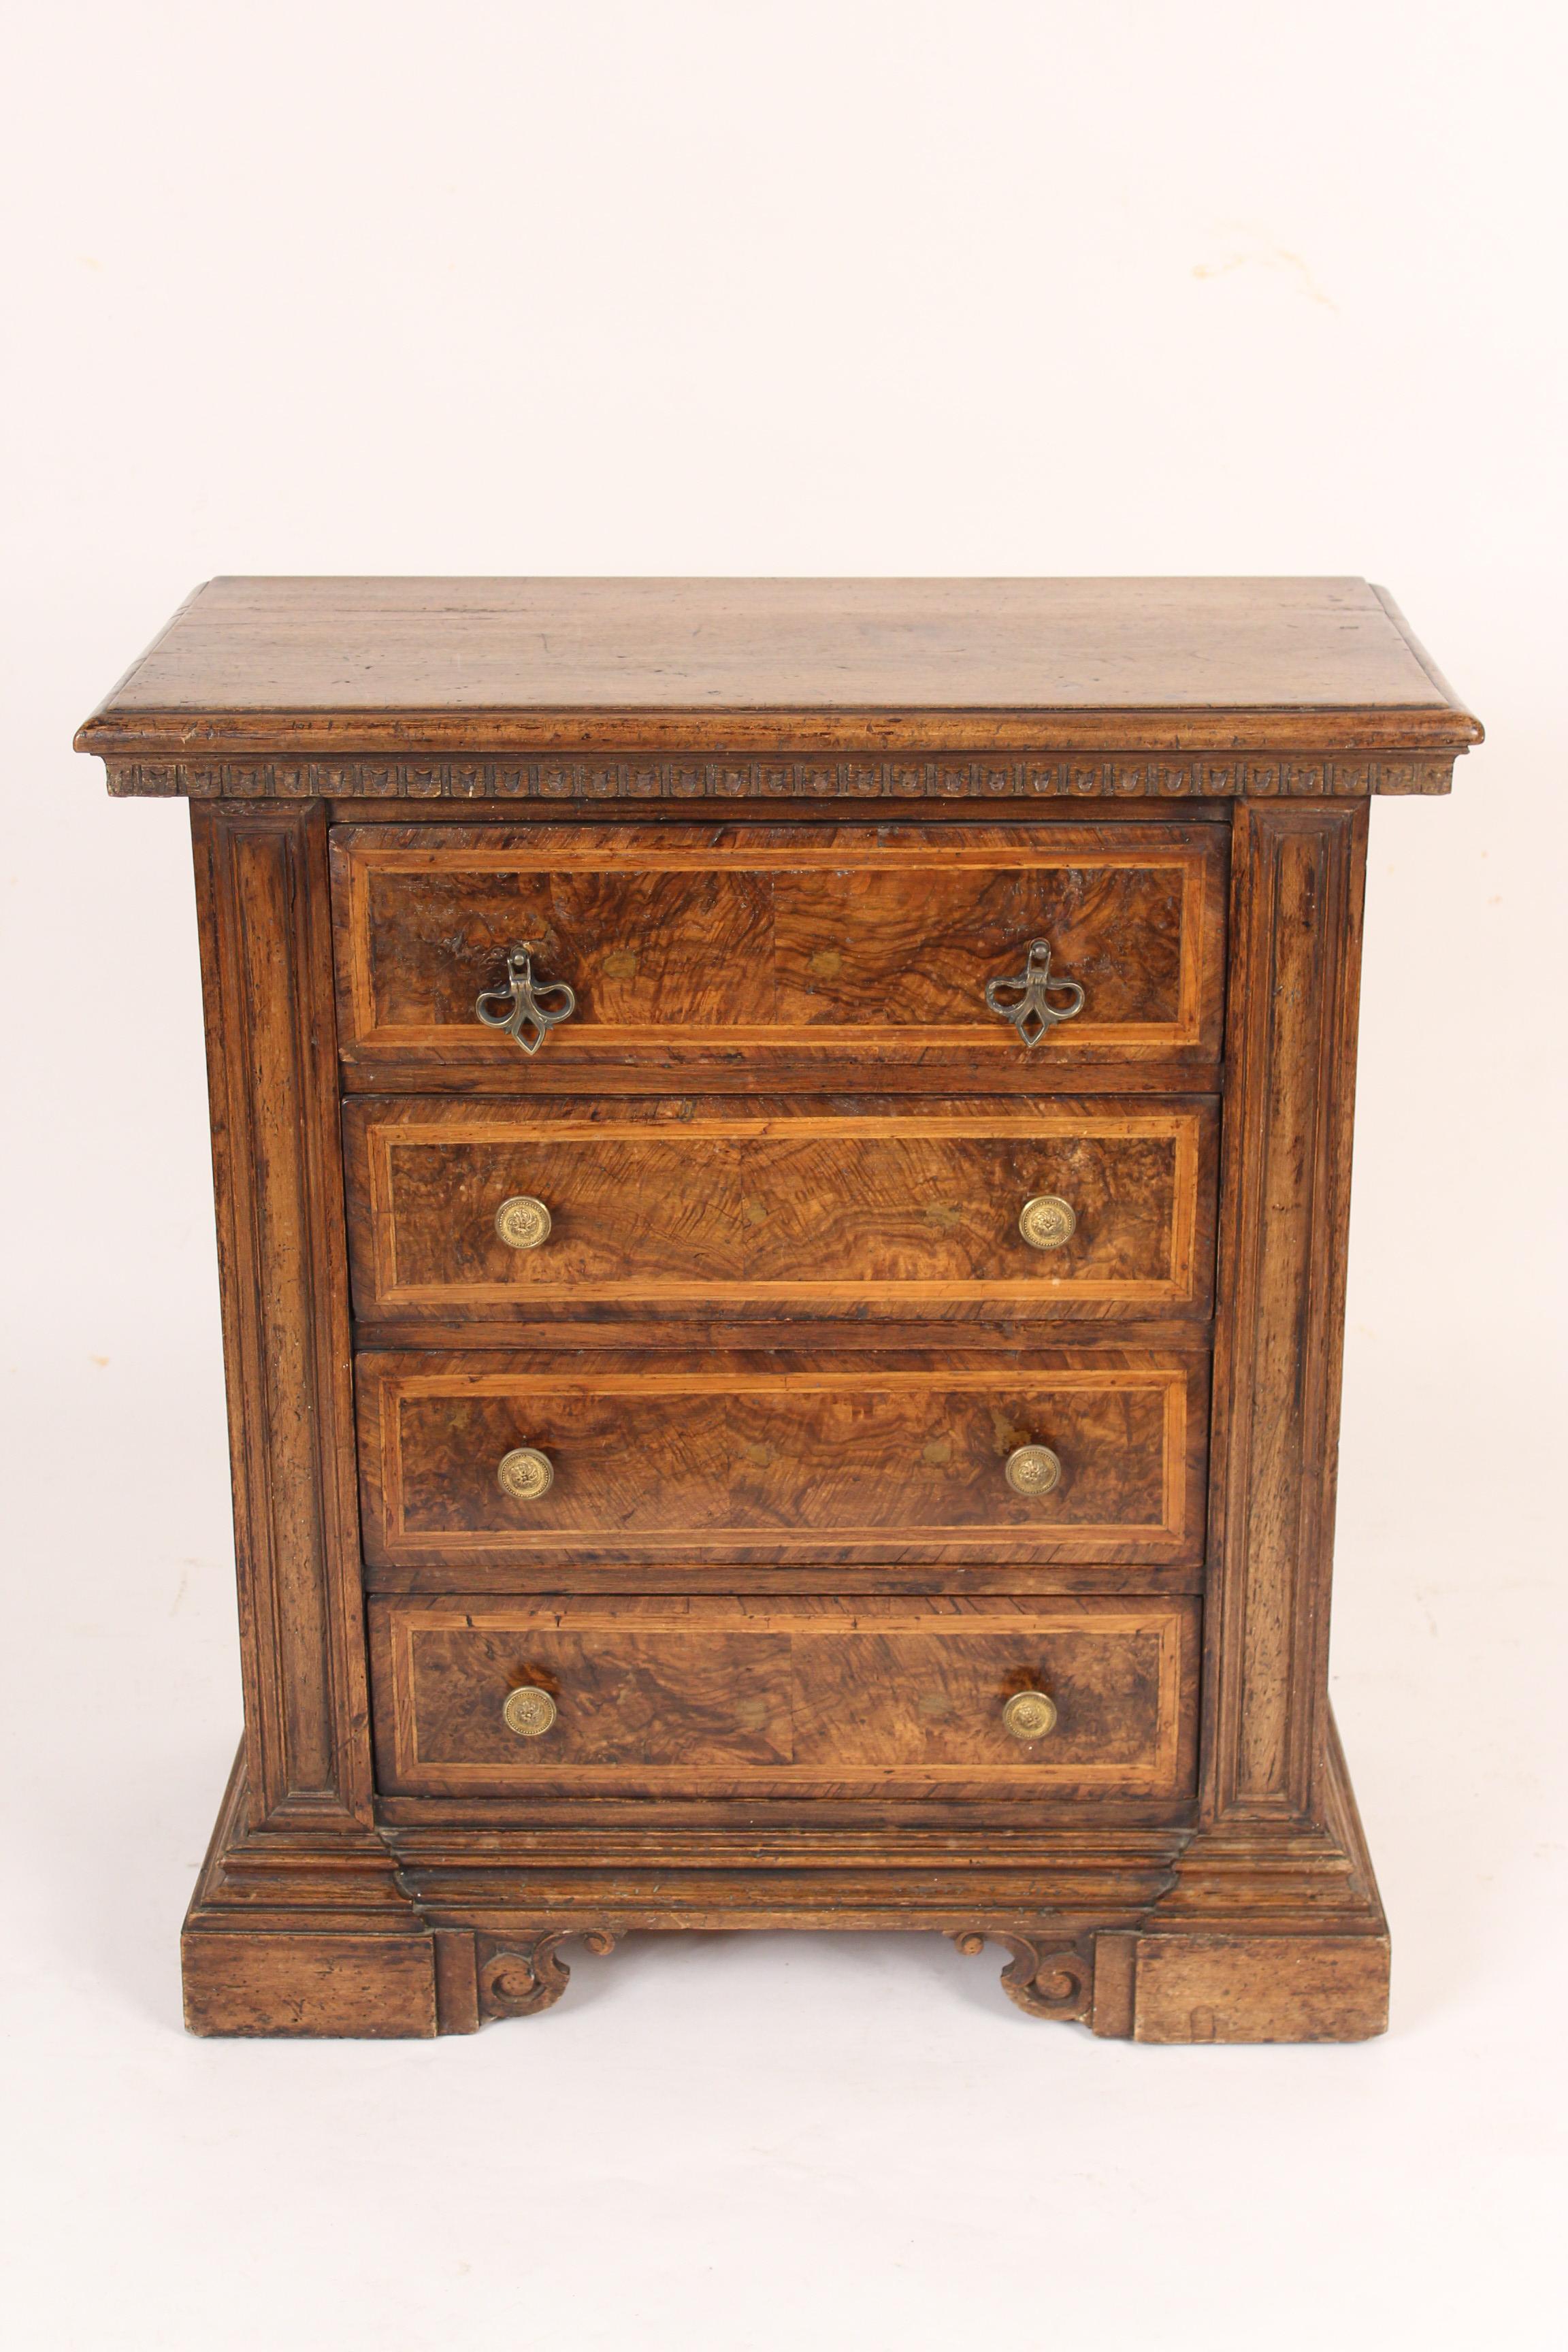 Baroque style walnut and burl walnut or burl olive chest of drawers, made from antique and later elements, circa 1930s.